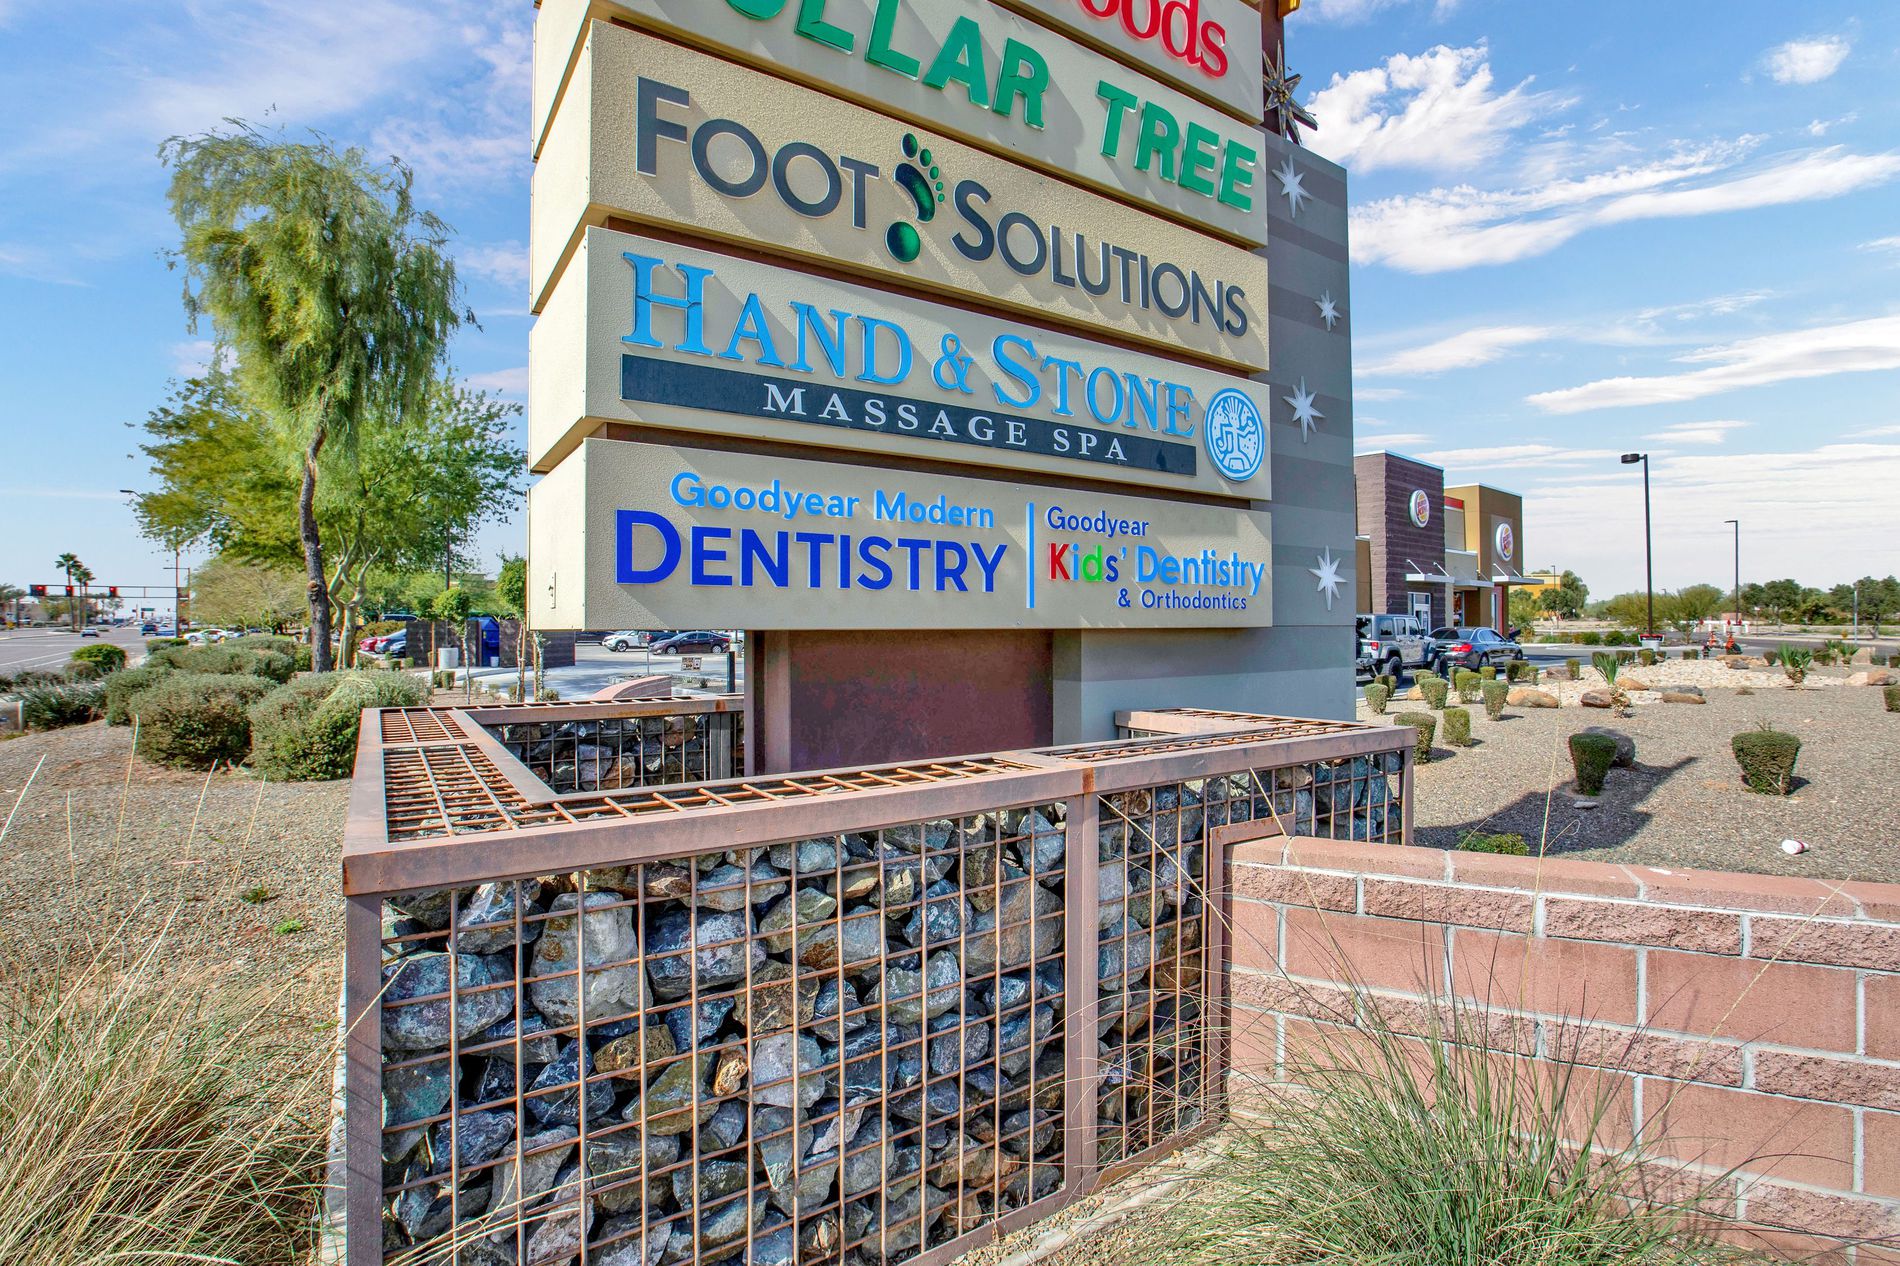 Images Goodyear Modern Dentistry